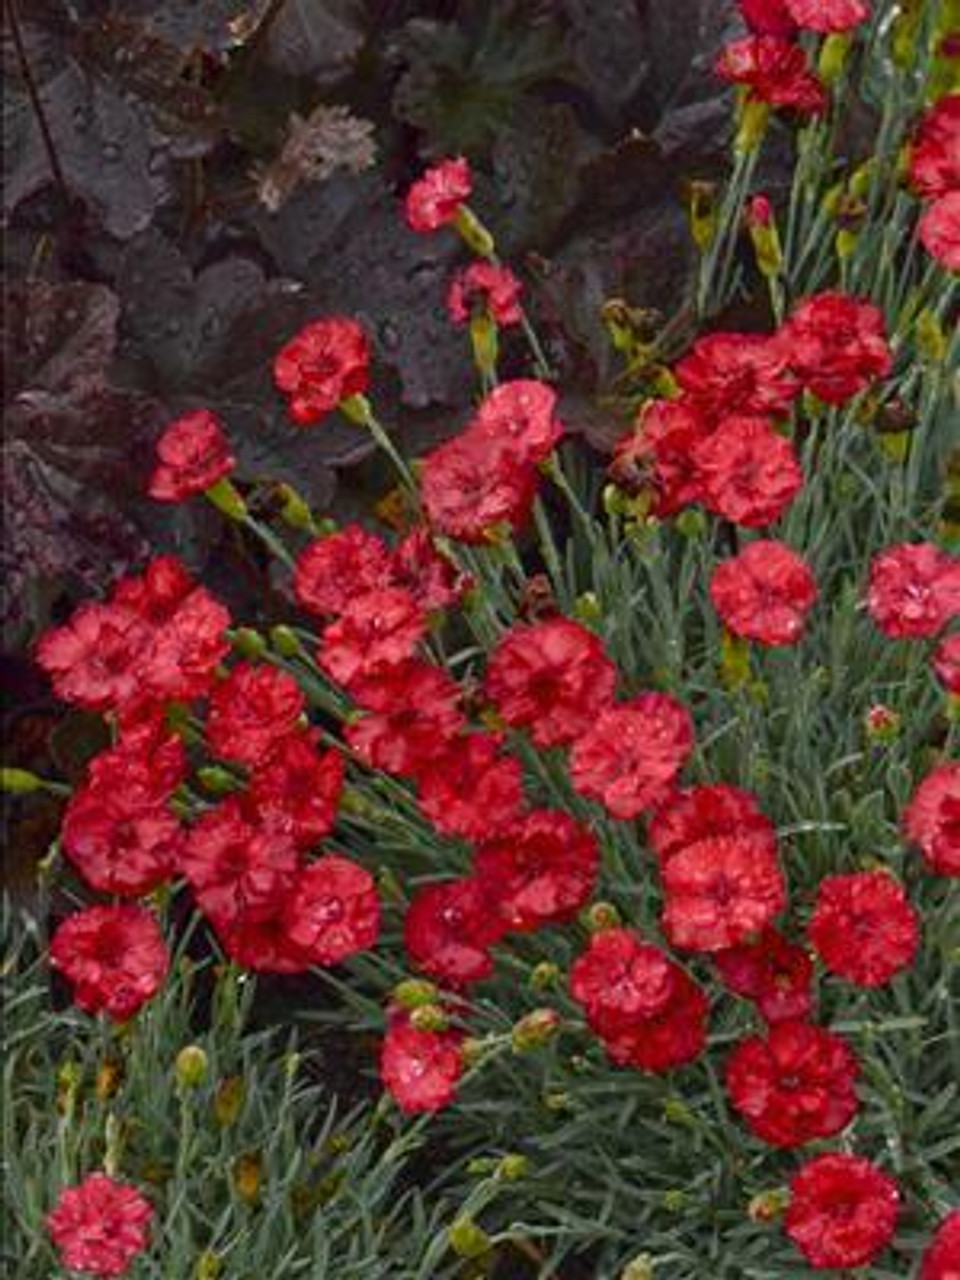 Dianthus Frosty Fire 30ct Flat